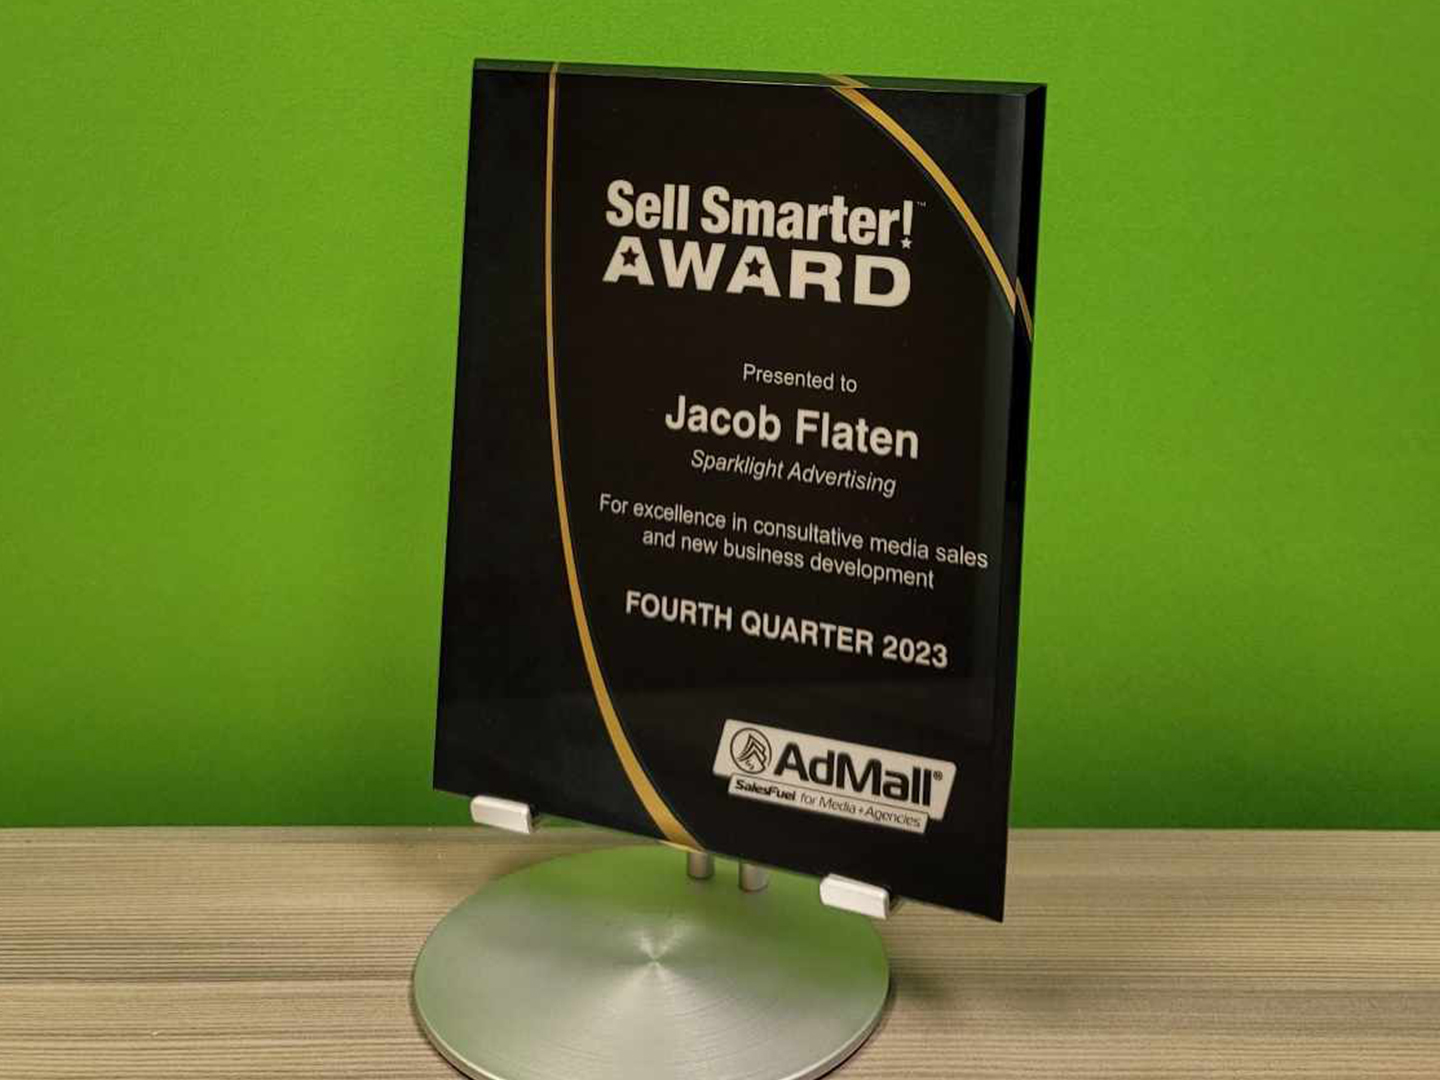 Featured image for “Sales Rep Wins 9th Sell Smarter Award by Closing $25,000 Bathroom Remodeling Digital Advertising Campaign”